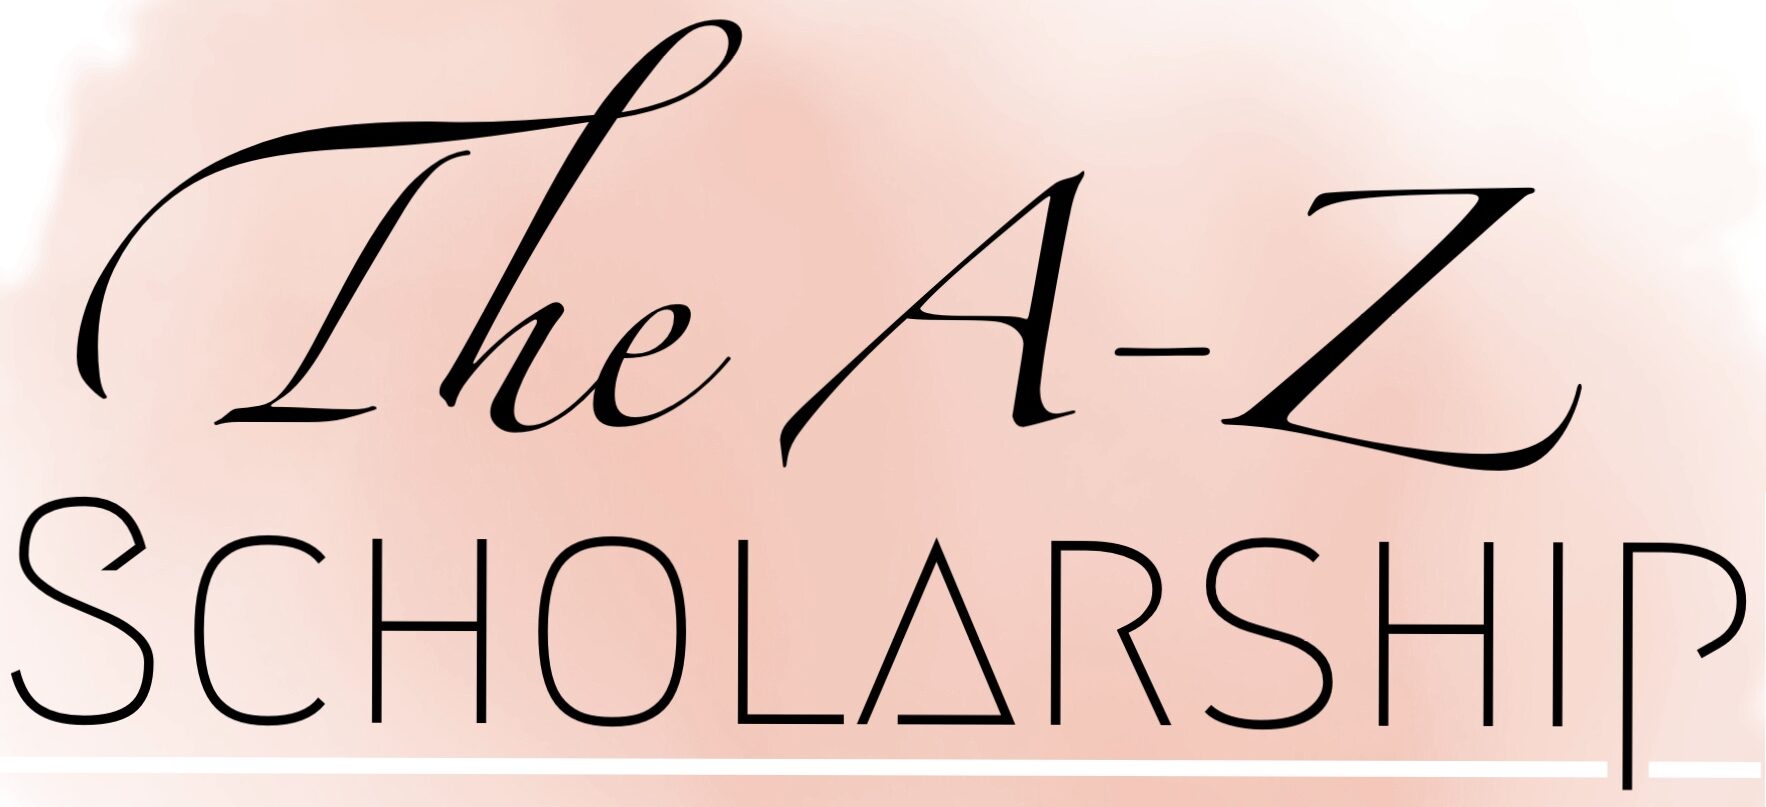 A to Z Scholarship - Advancing Equity and Inclusion